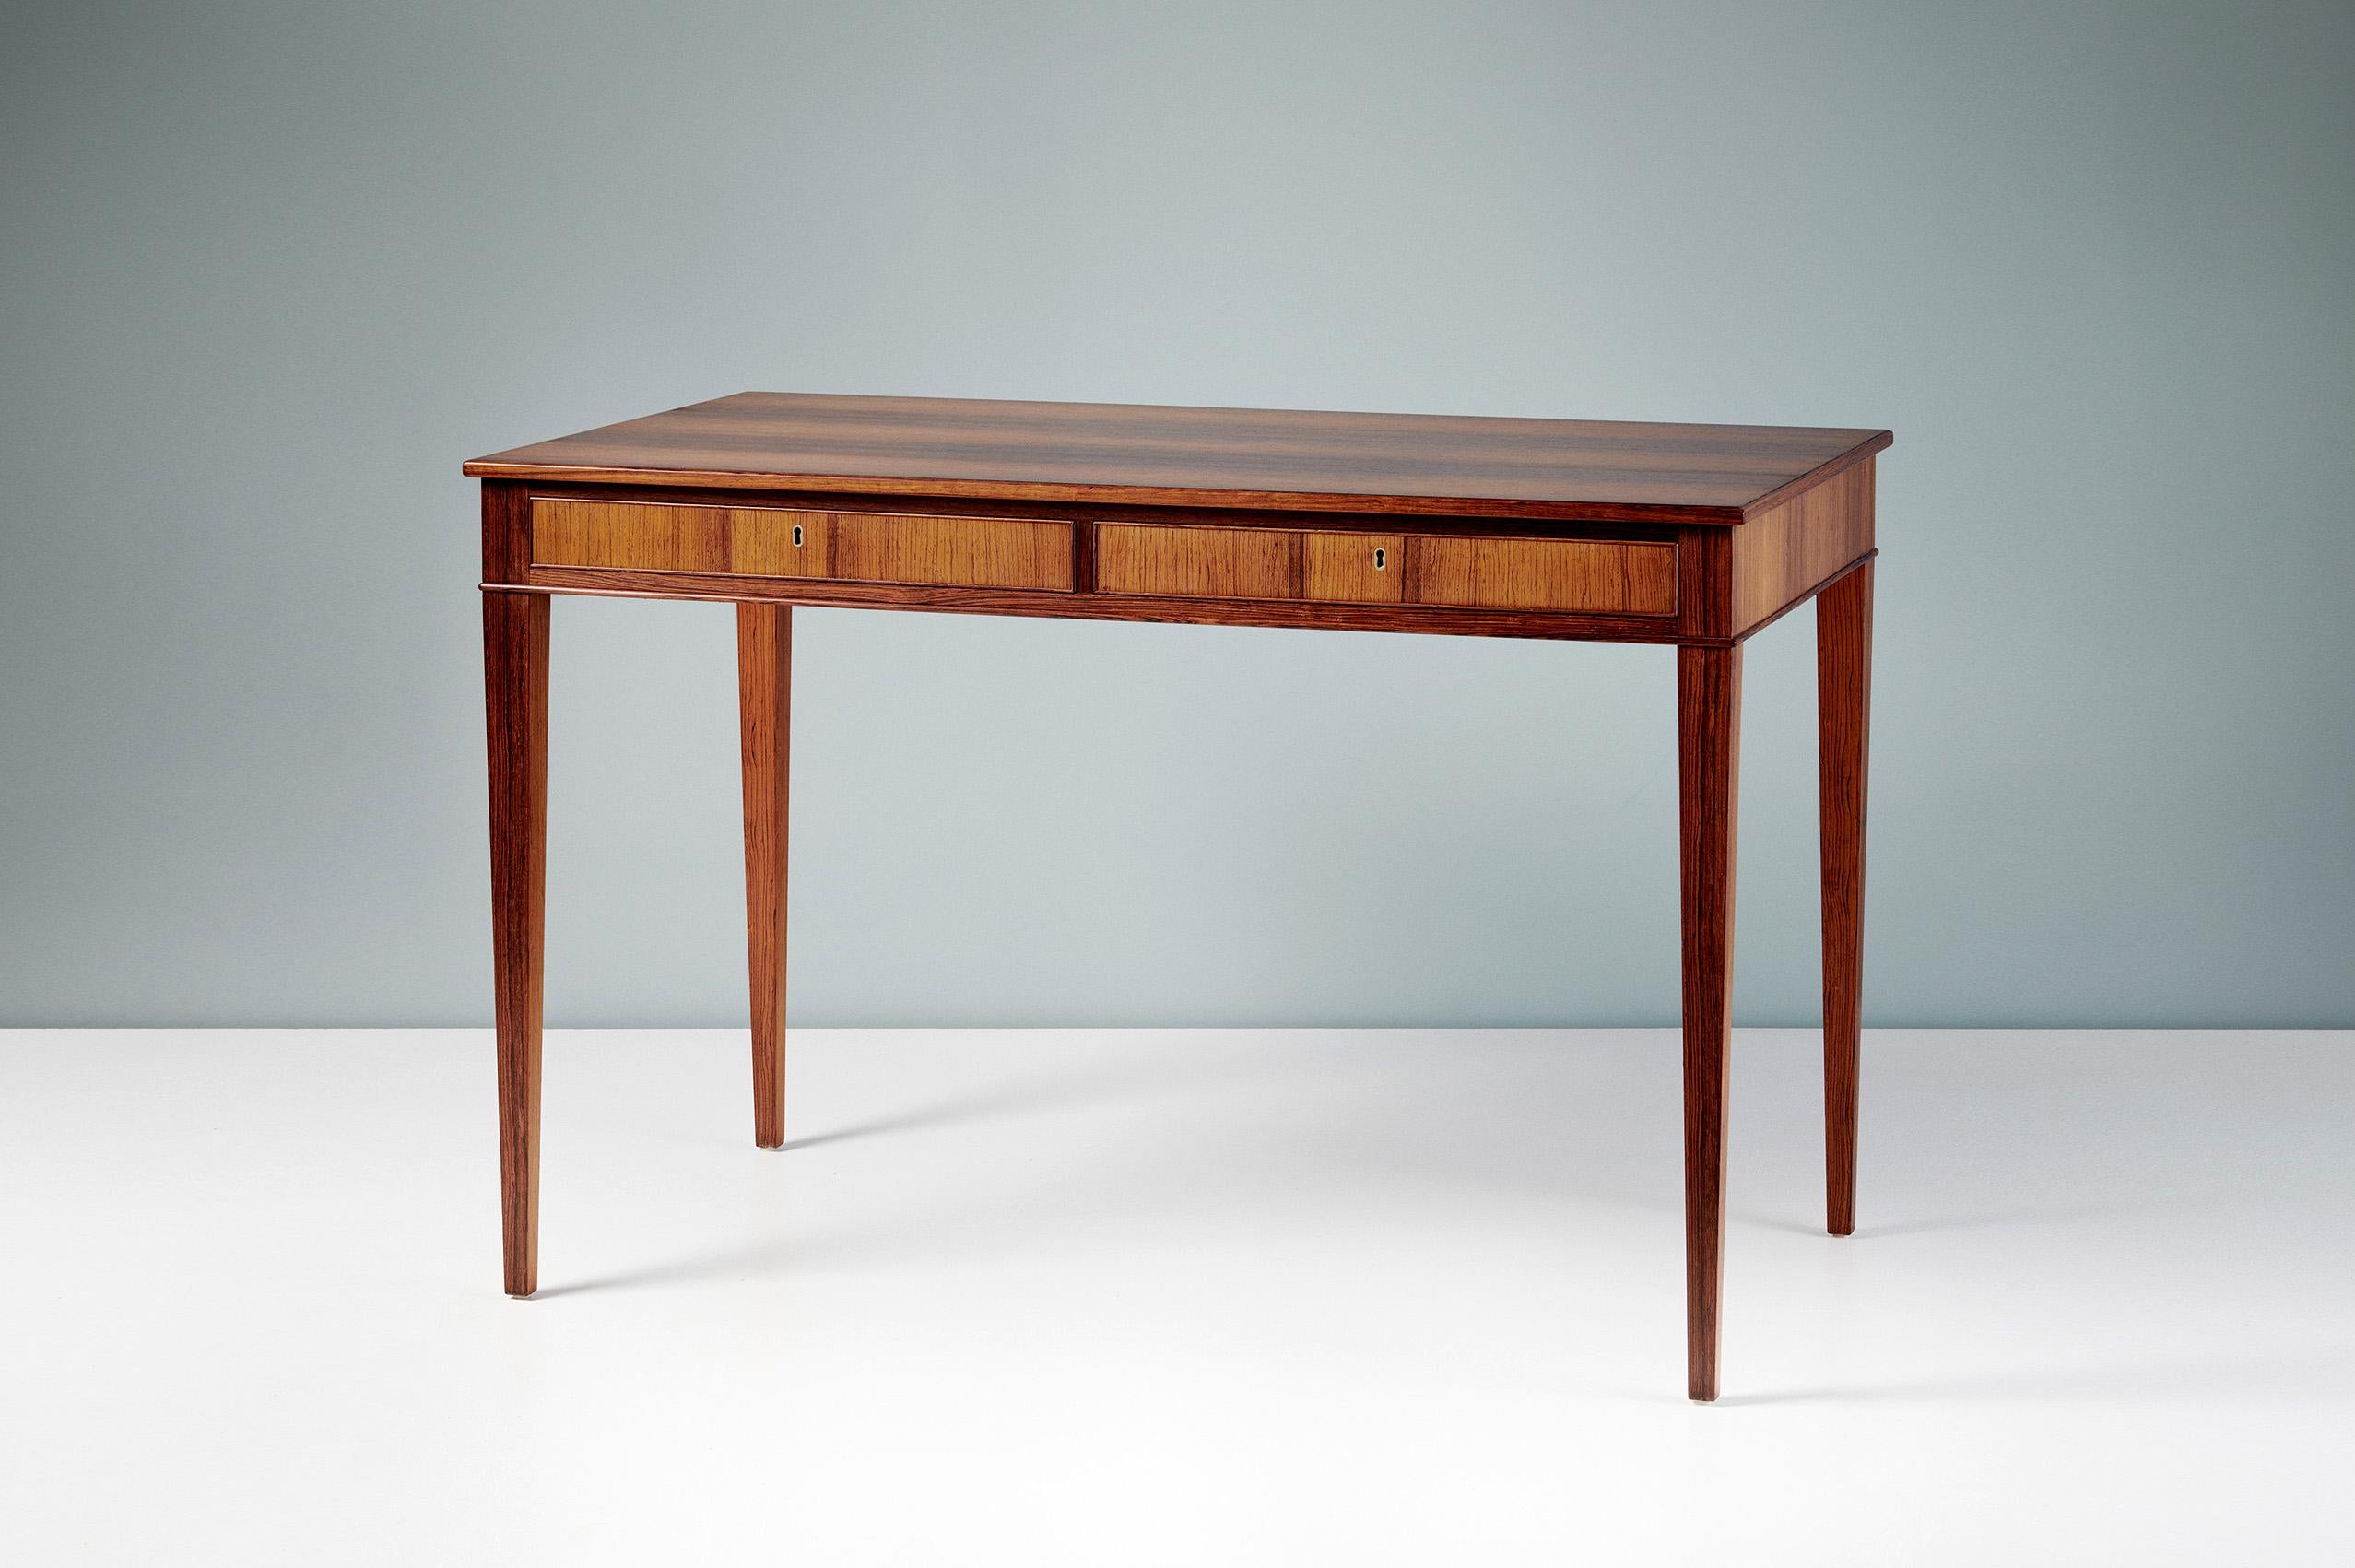 Frits Henningsen - Writing Desk, c1940s

Rarely seen design from the master cabinetmaker of the early Danish Modern period: Frits Henningsen. Henningsen produced all of his designs at his own workshop in limited volumes. This exquisite, classical